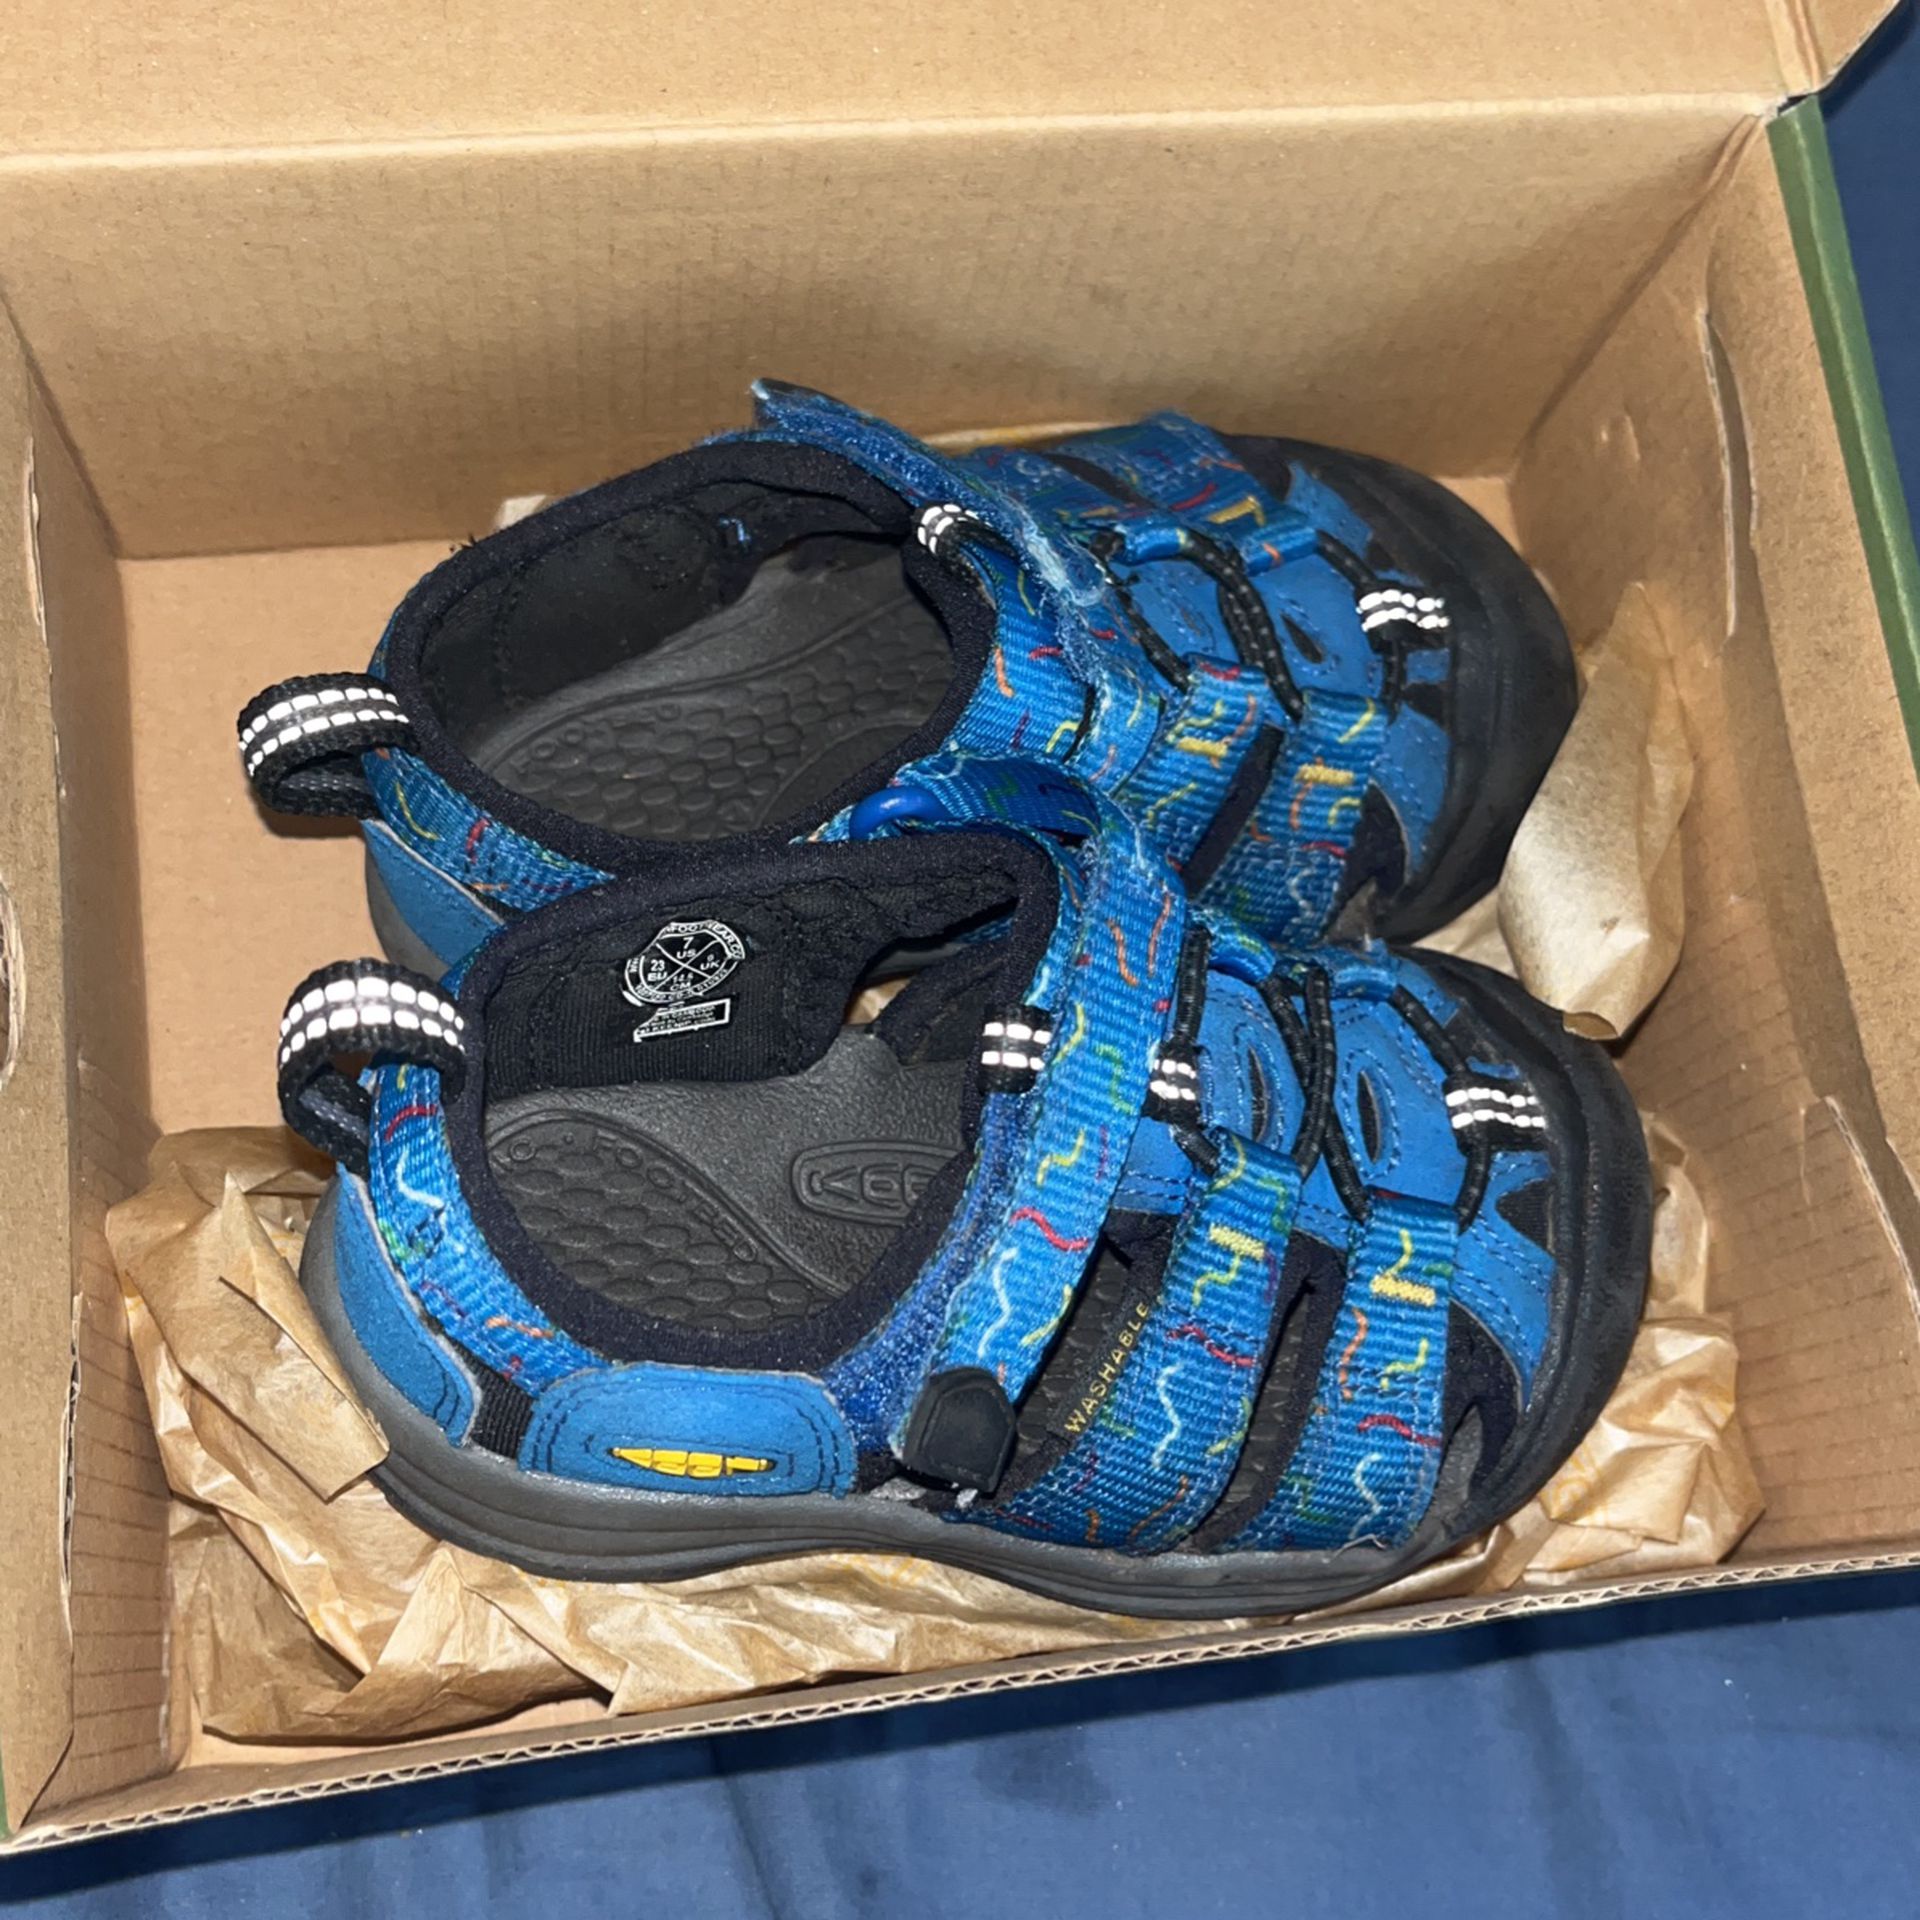 Keen Toddler Shoes